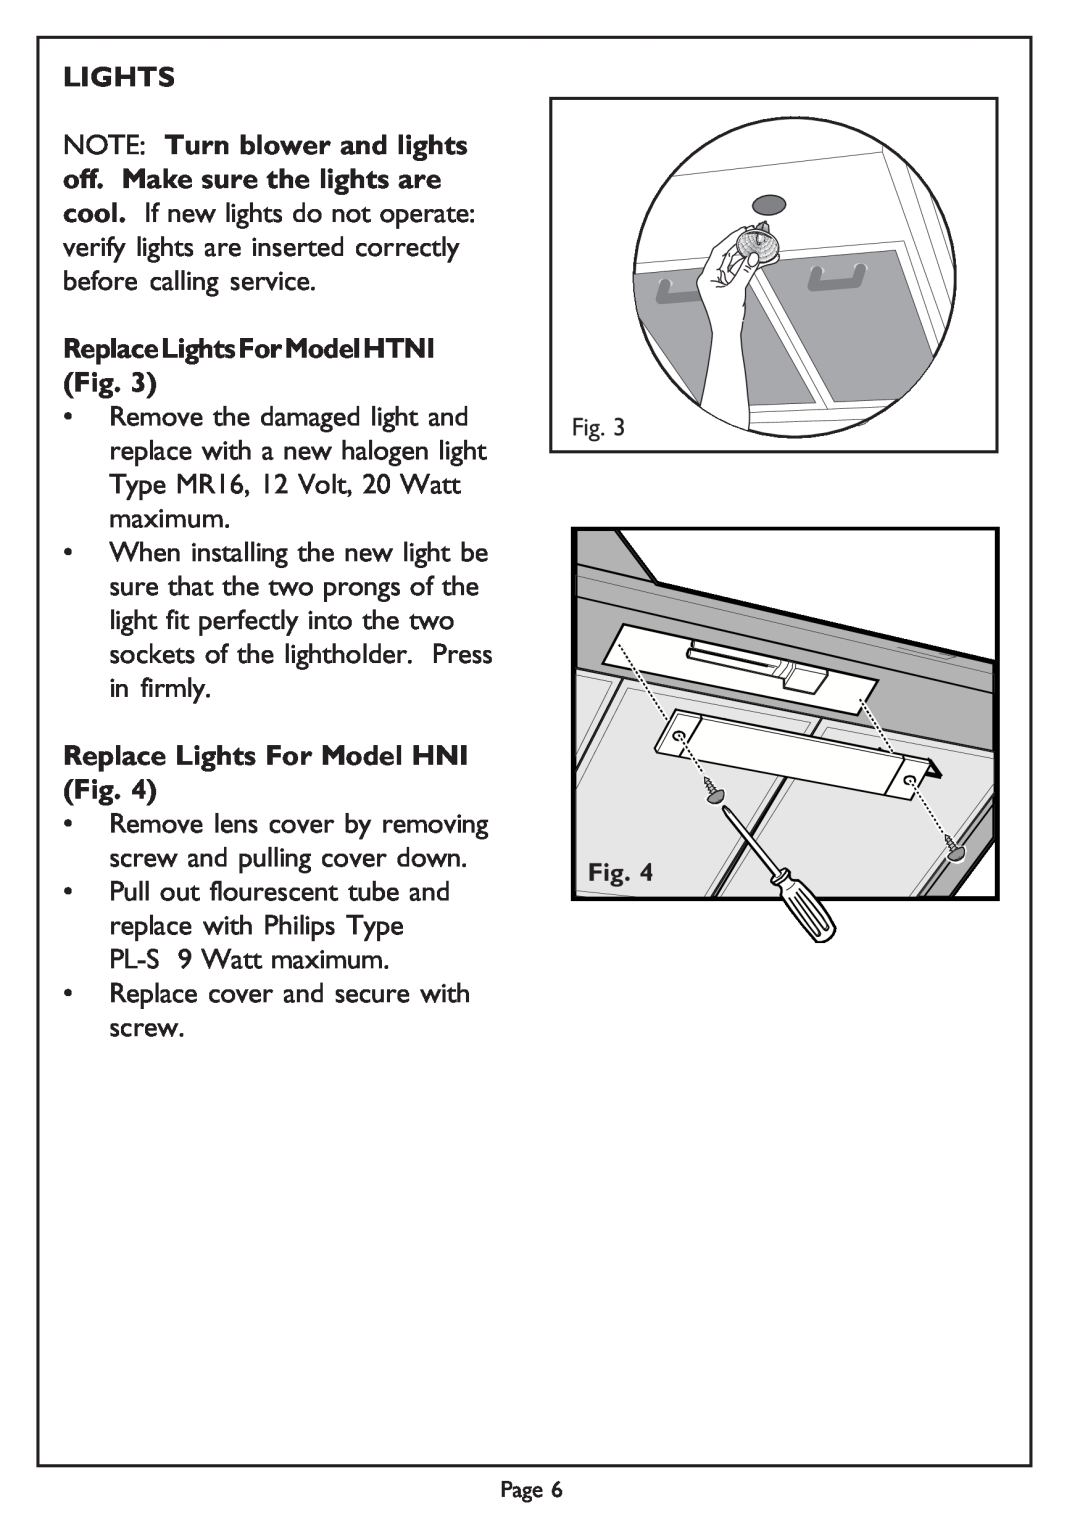 Thermador Thermador installation instructions Lights 